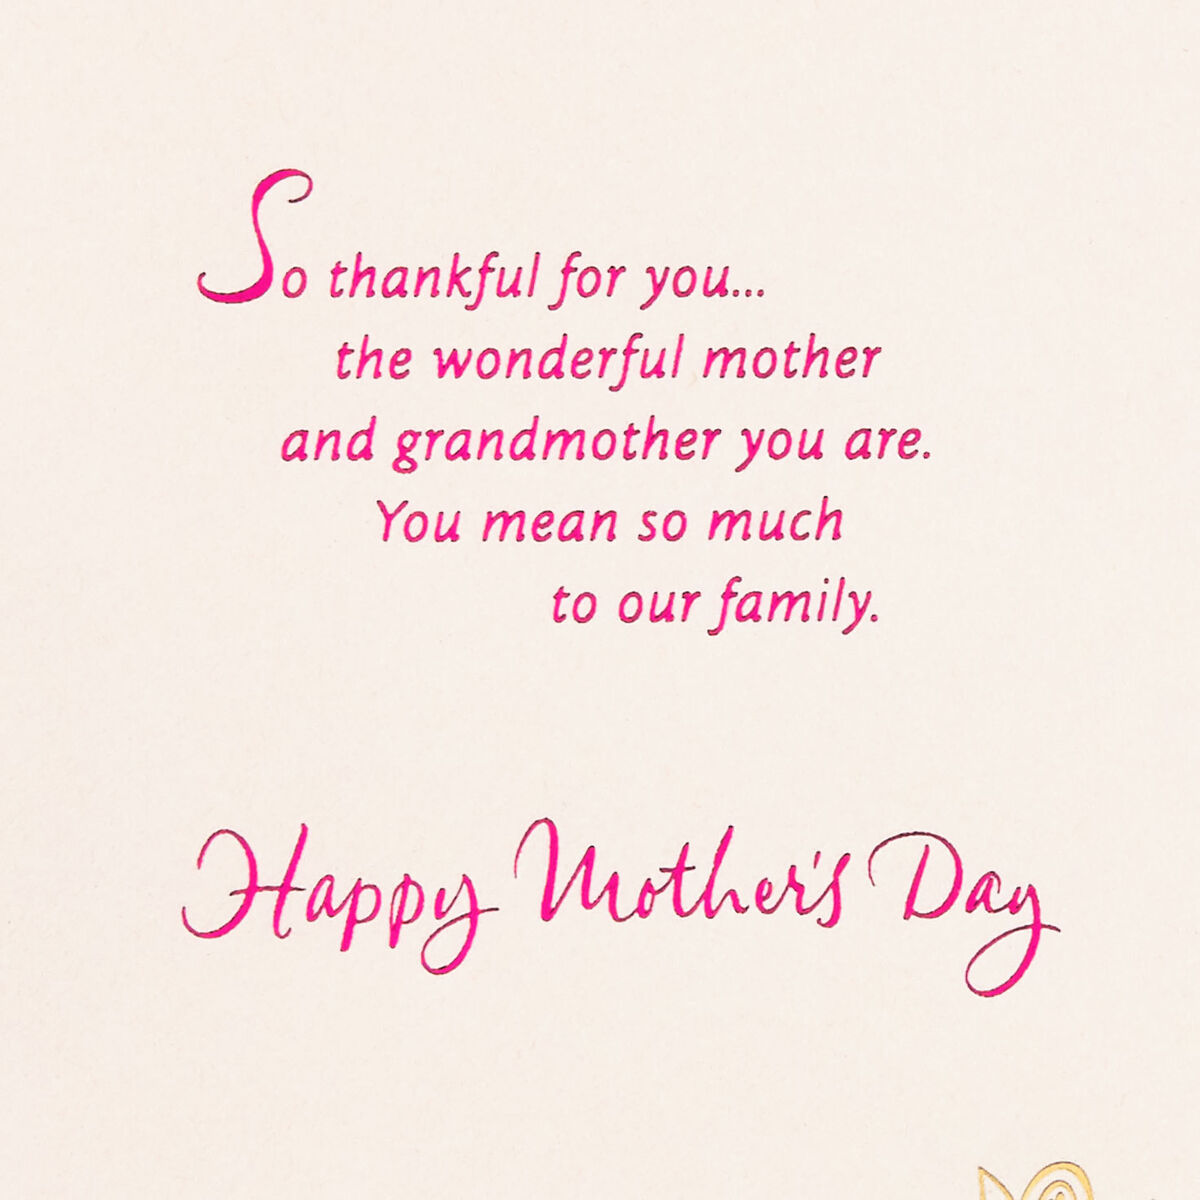 So Thankful for You Mother's Day Card for Grandmother - Greeting Cards ...